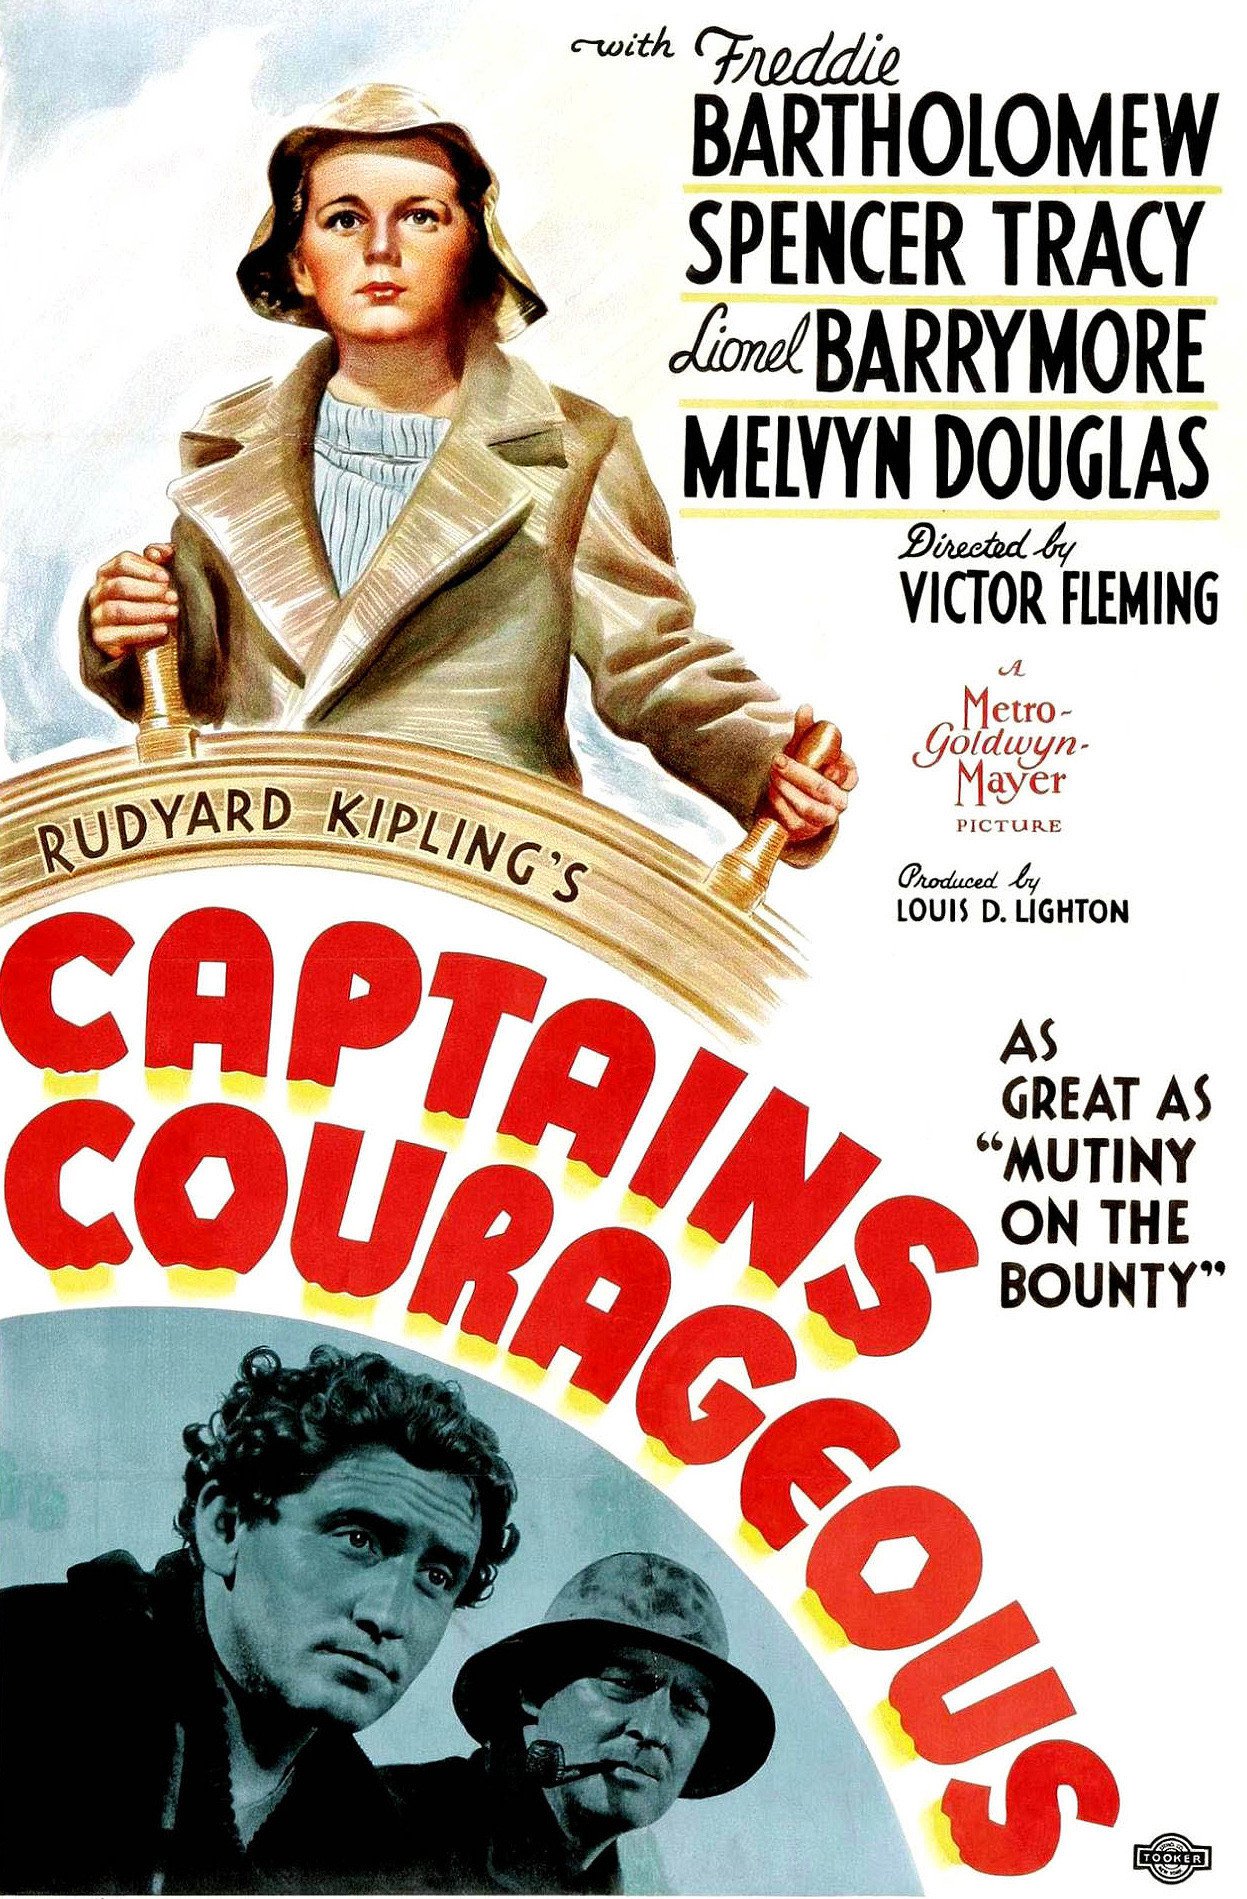 Poster for the movie "Captains Courageous"